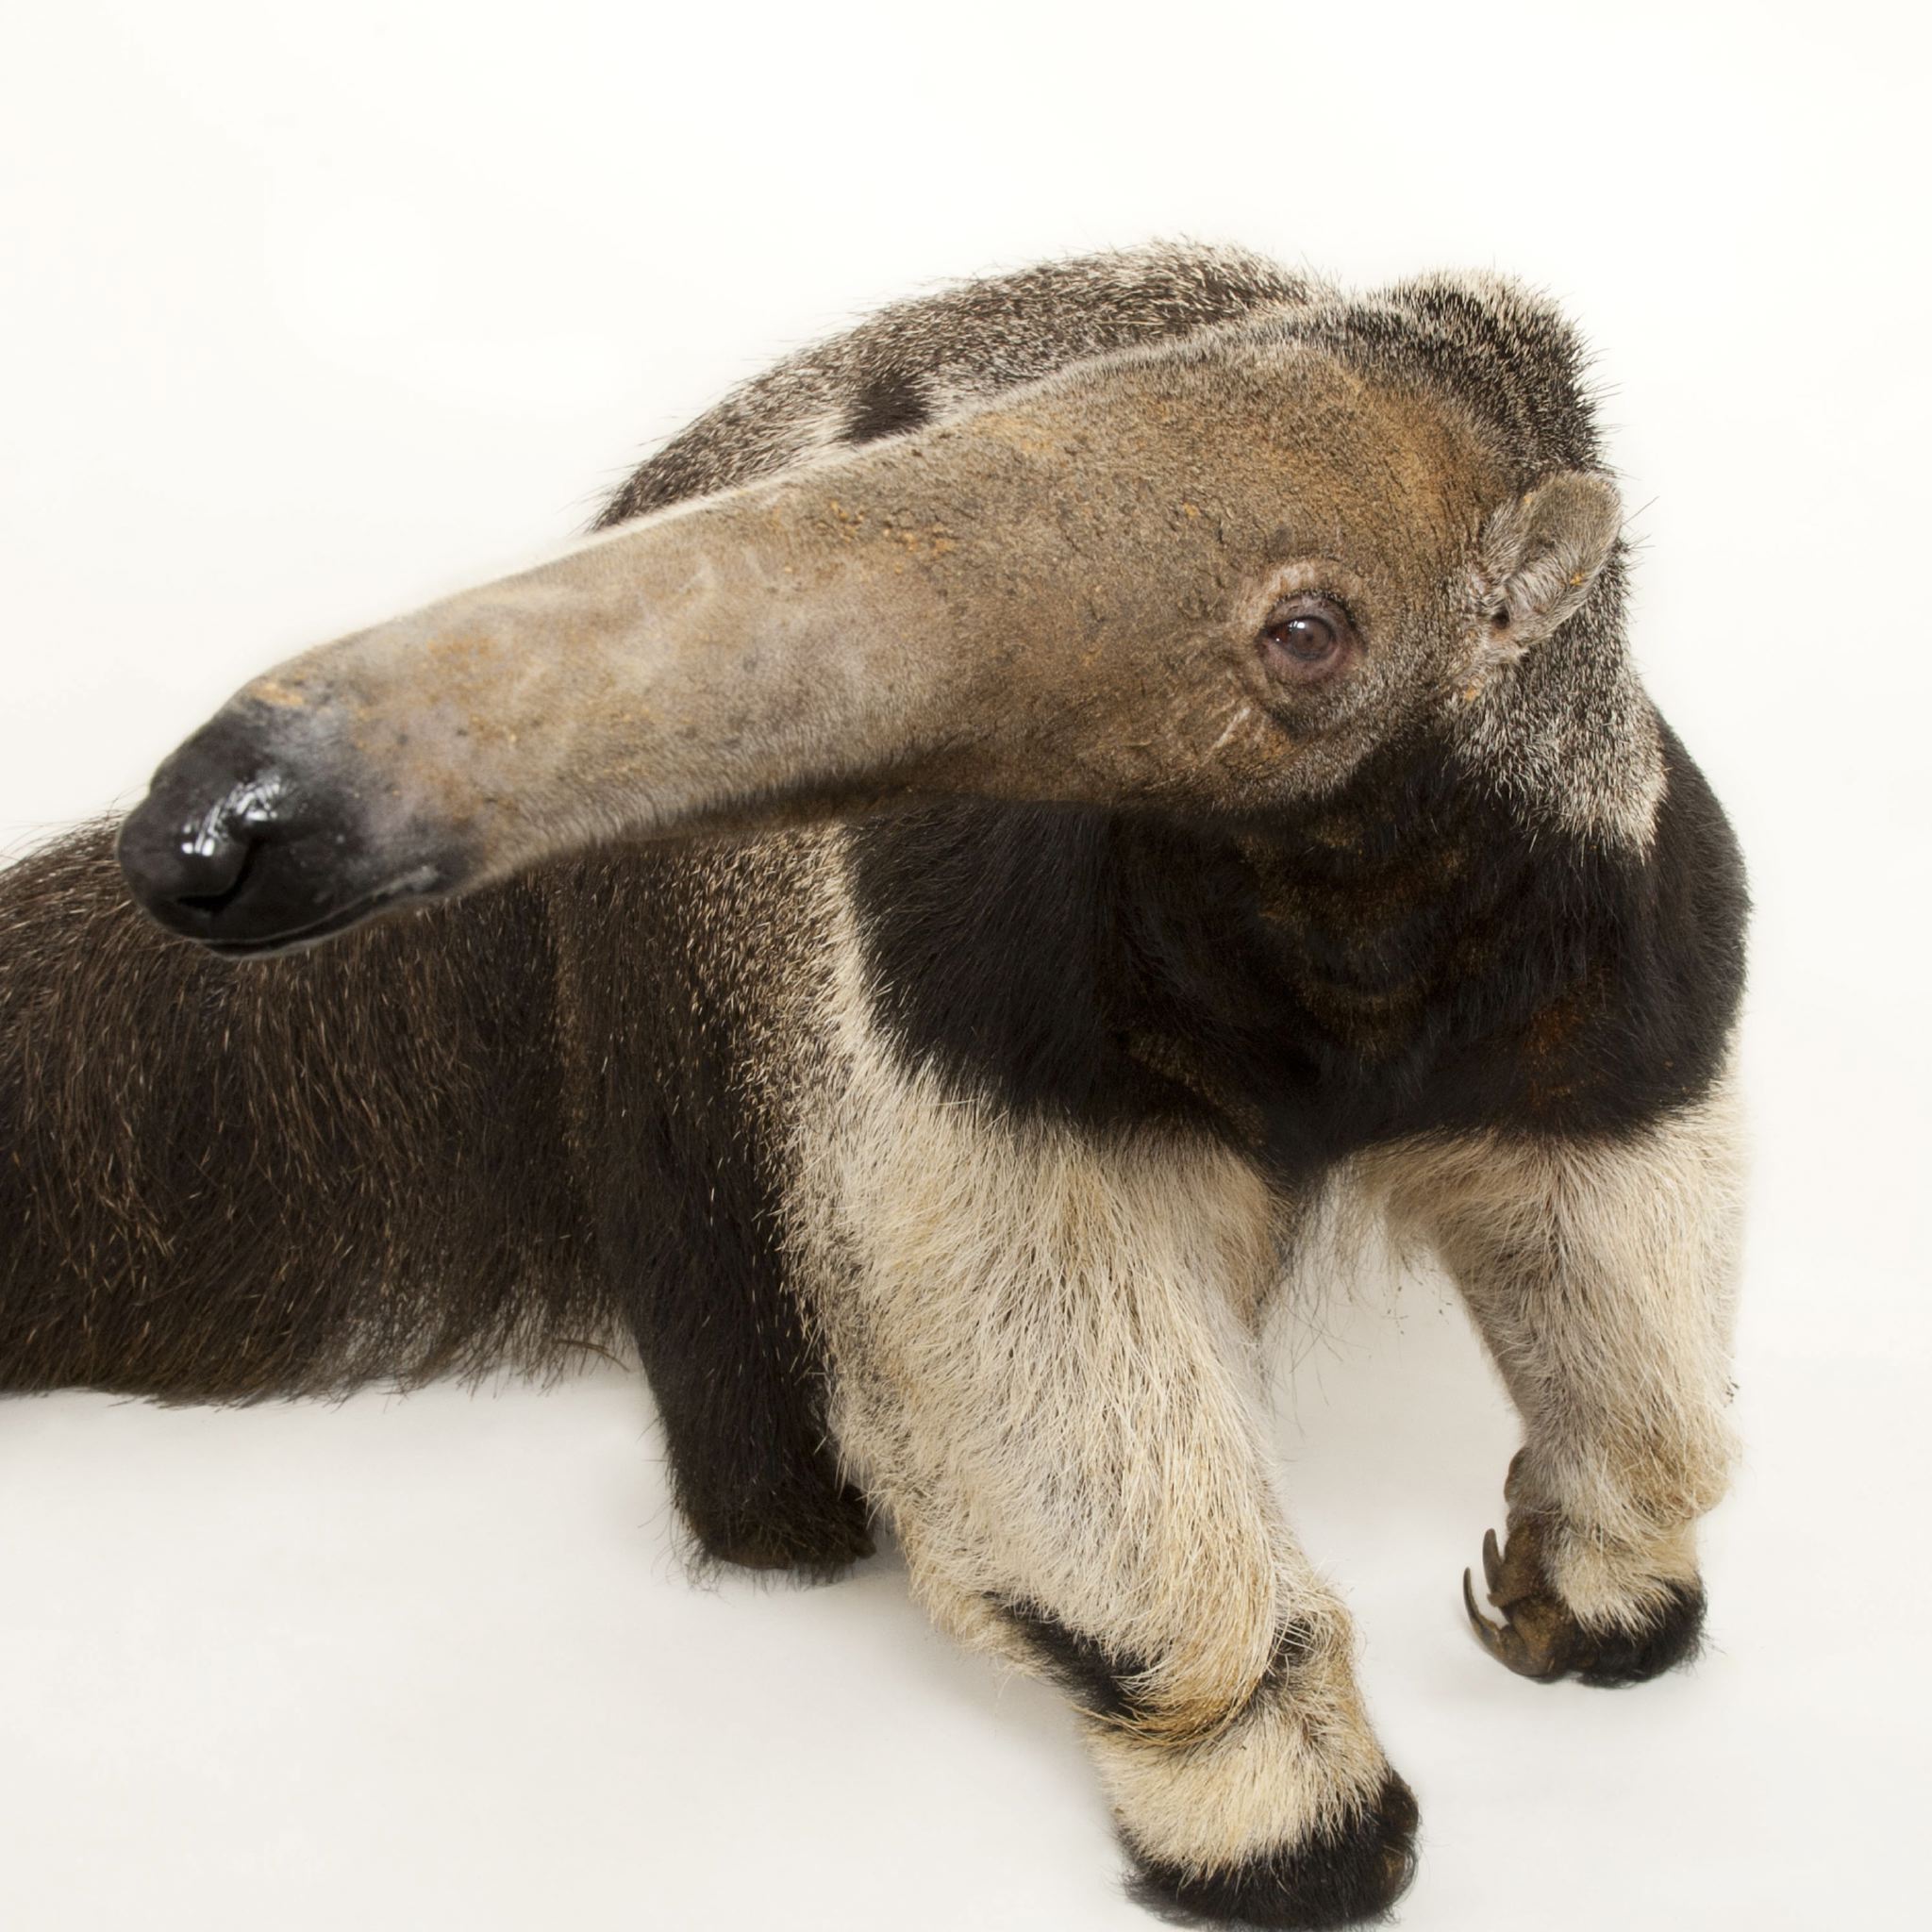 Giant Anteater | National Geographic